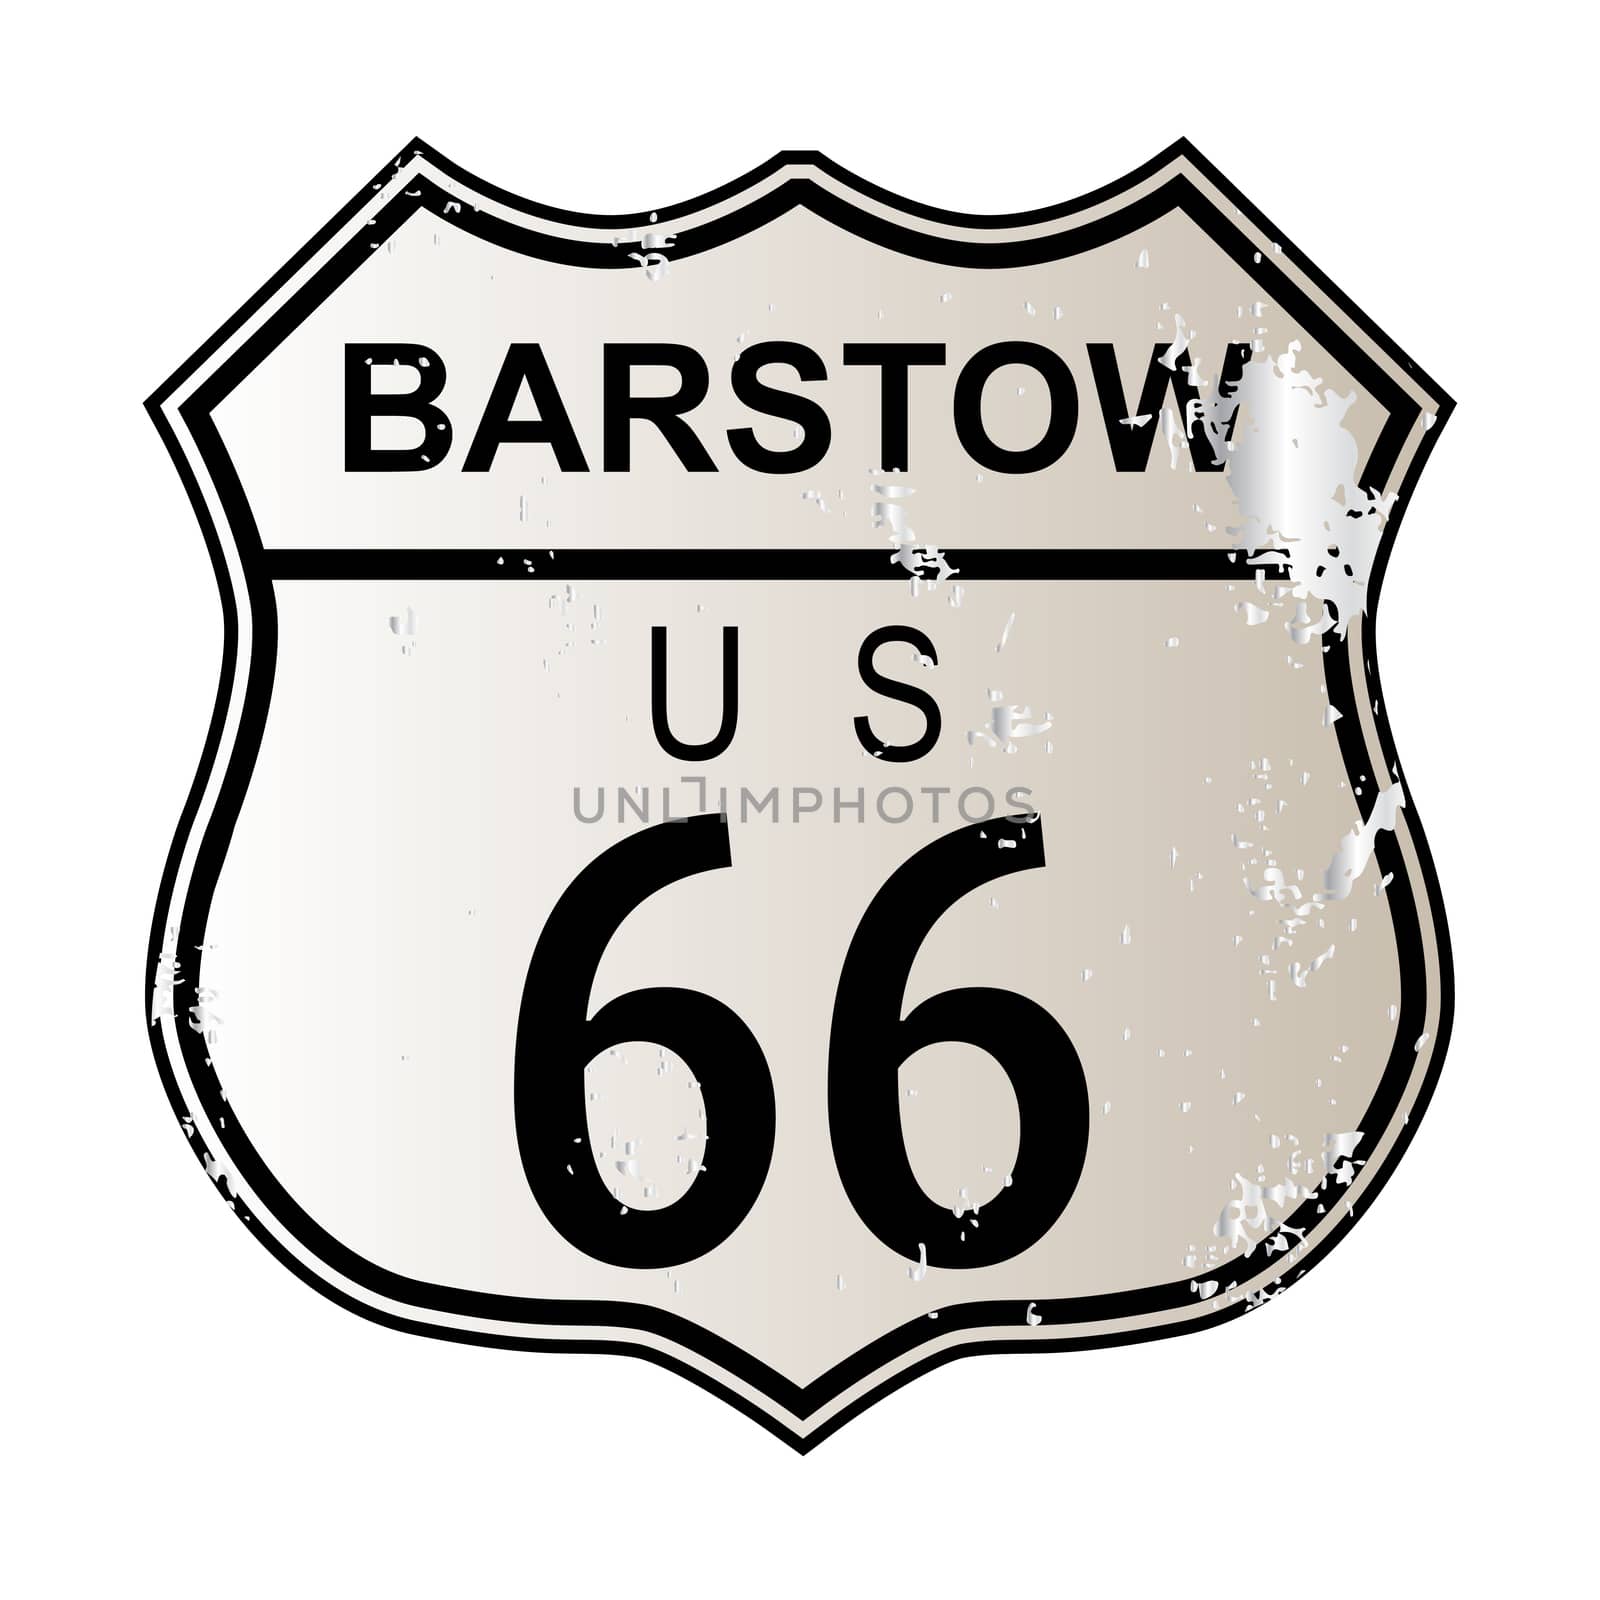 Barstow Route 66 traffic sign over a white background and the legend ROUTE US 66